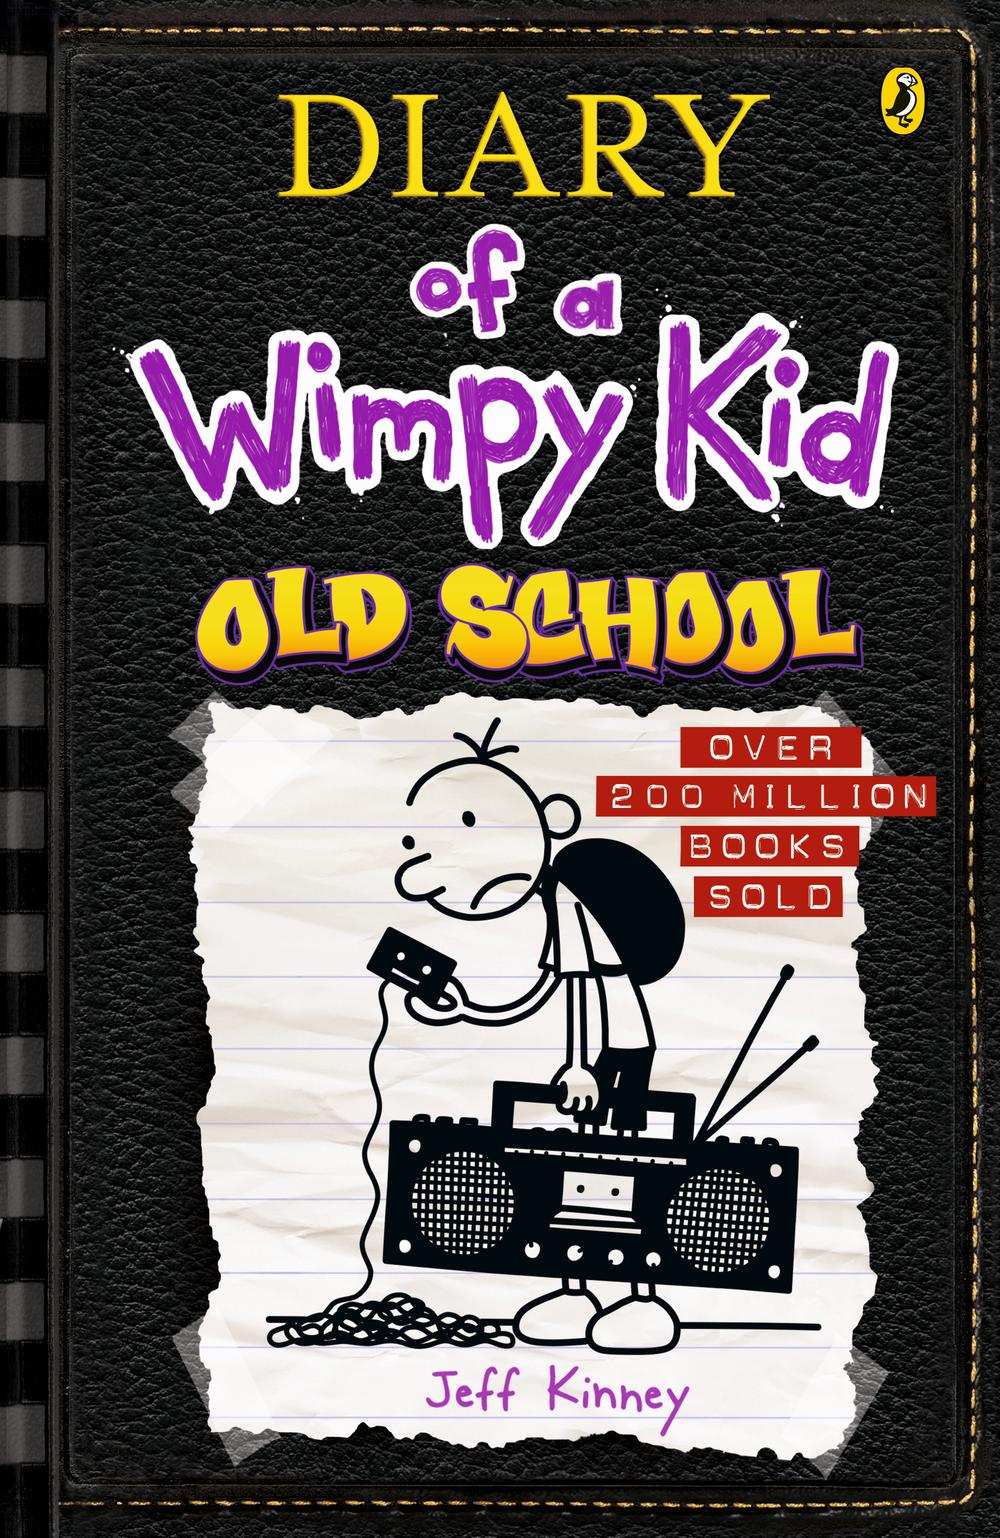 diary-of-a-wimpy-kid-10-old-school-by-jeff-kinney-paperback